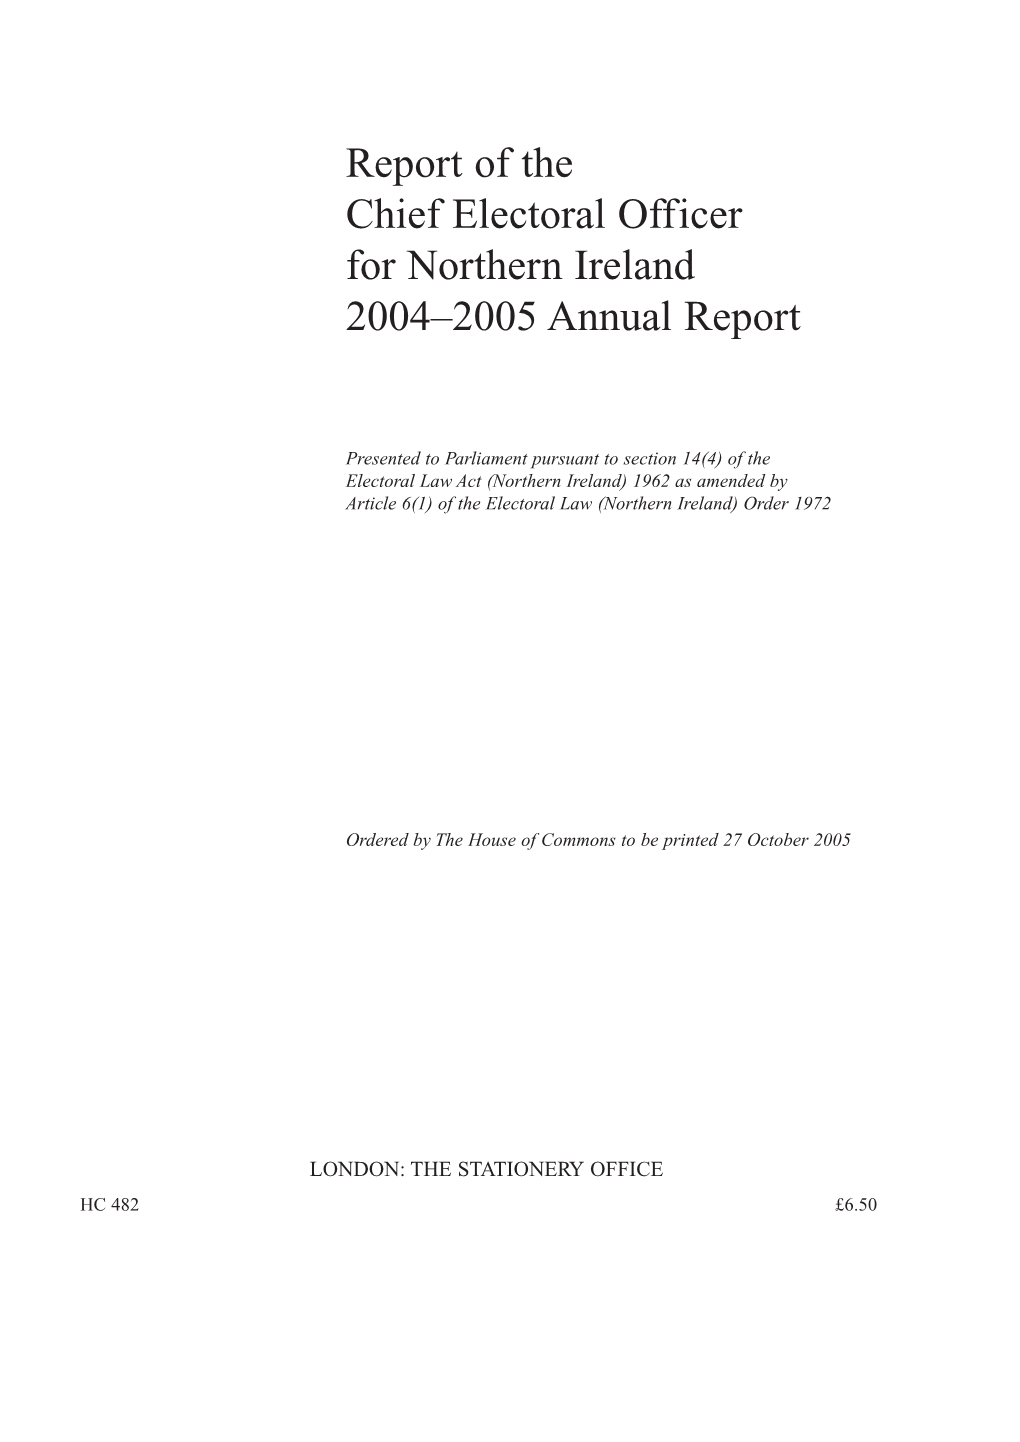 Report of the Chief Electoral Officer for Northern Ireland 2004–2005 Annual Report